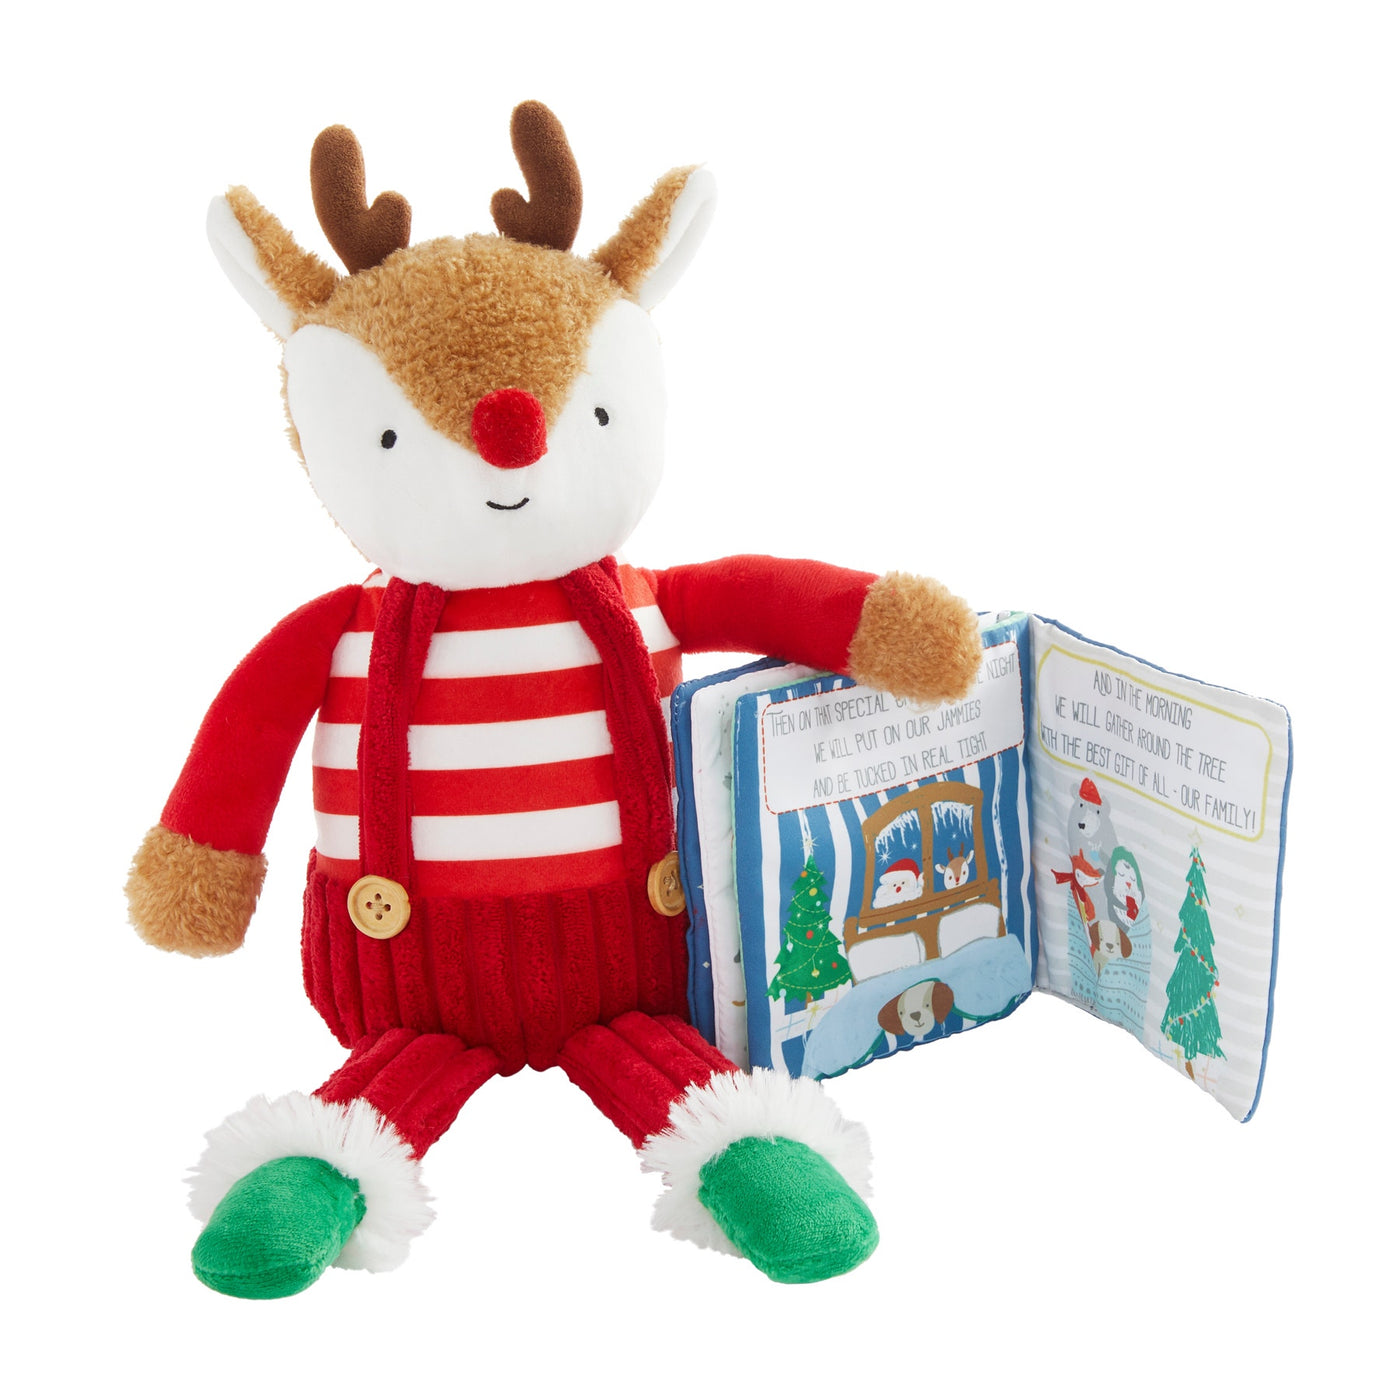 Mud Pie Holiday Plush with Book Reindeer